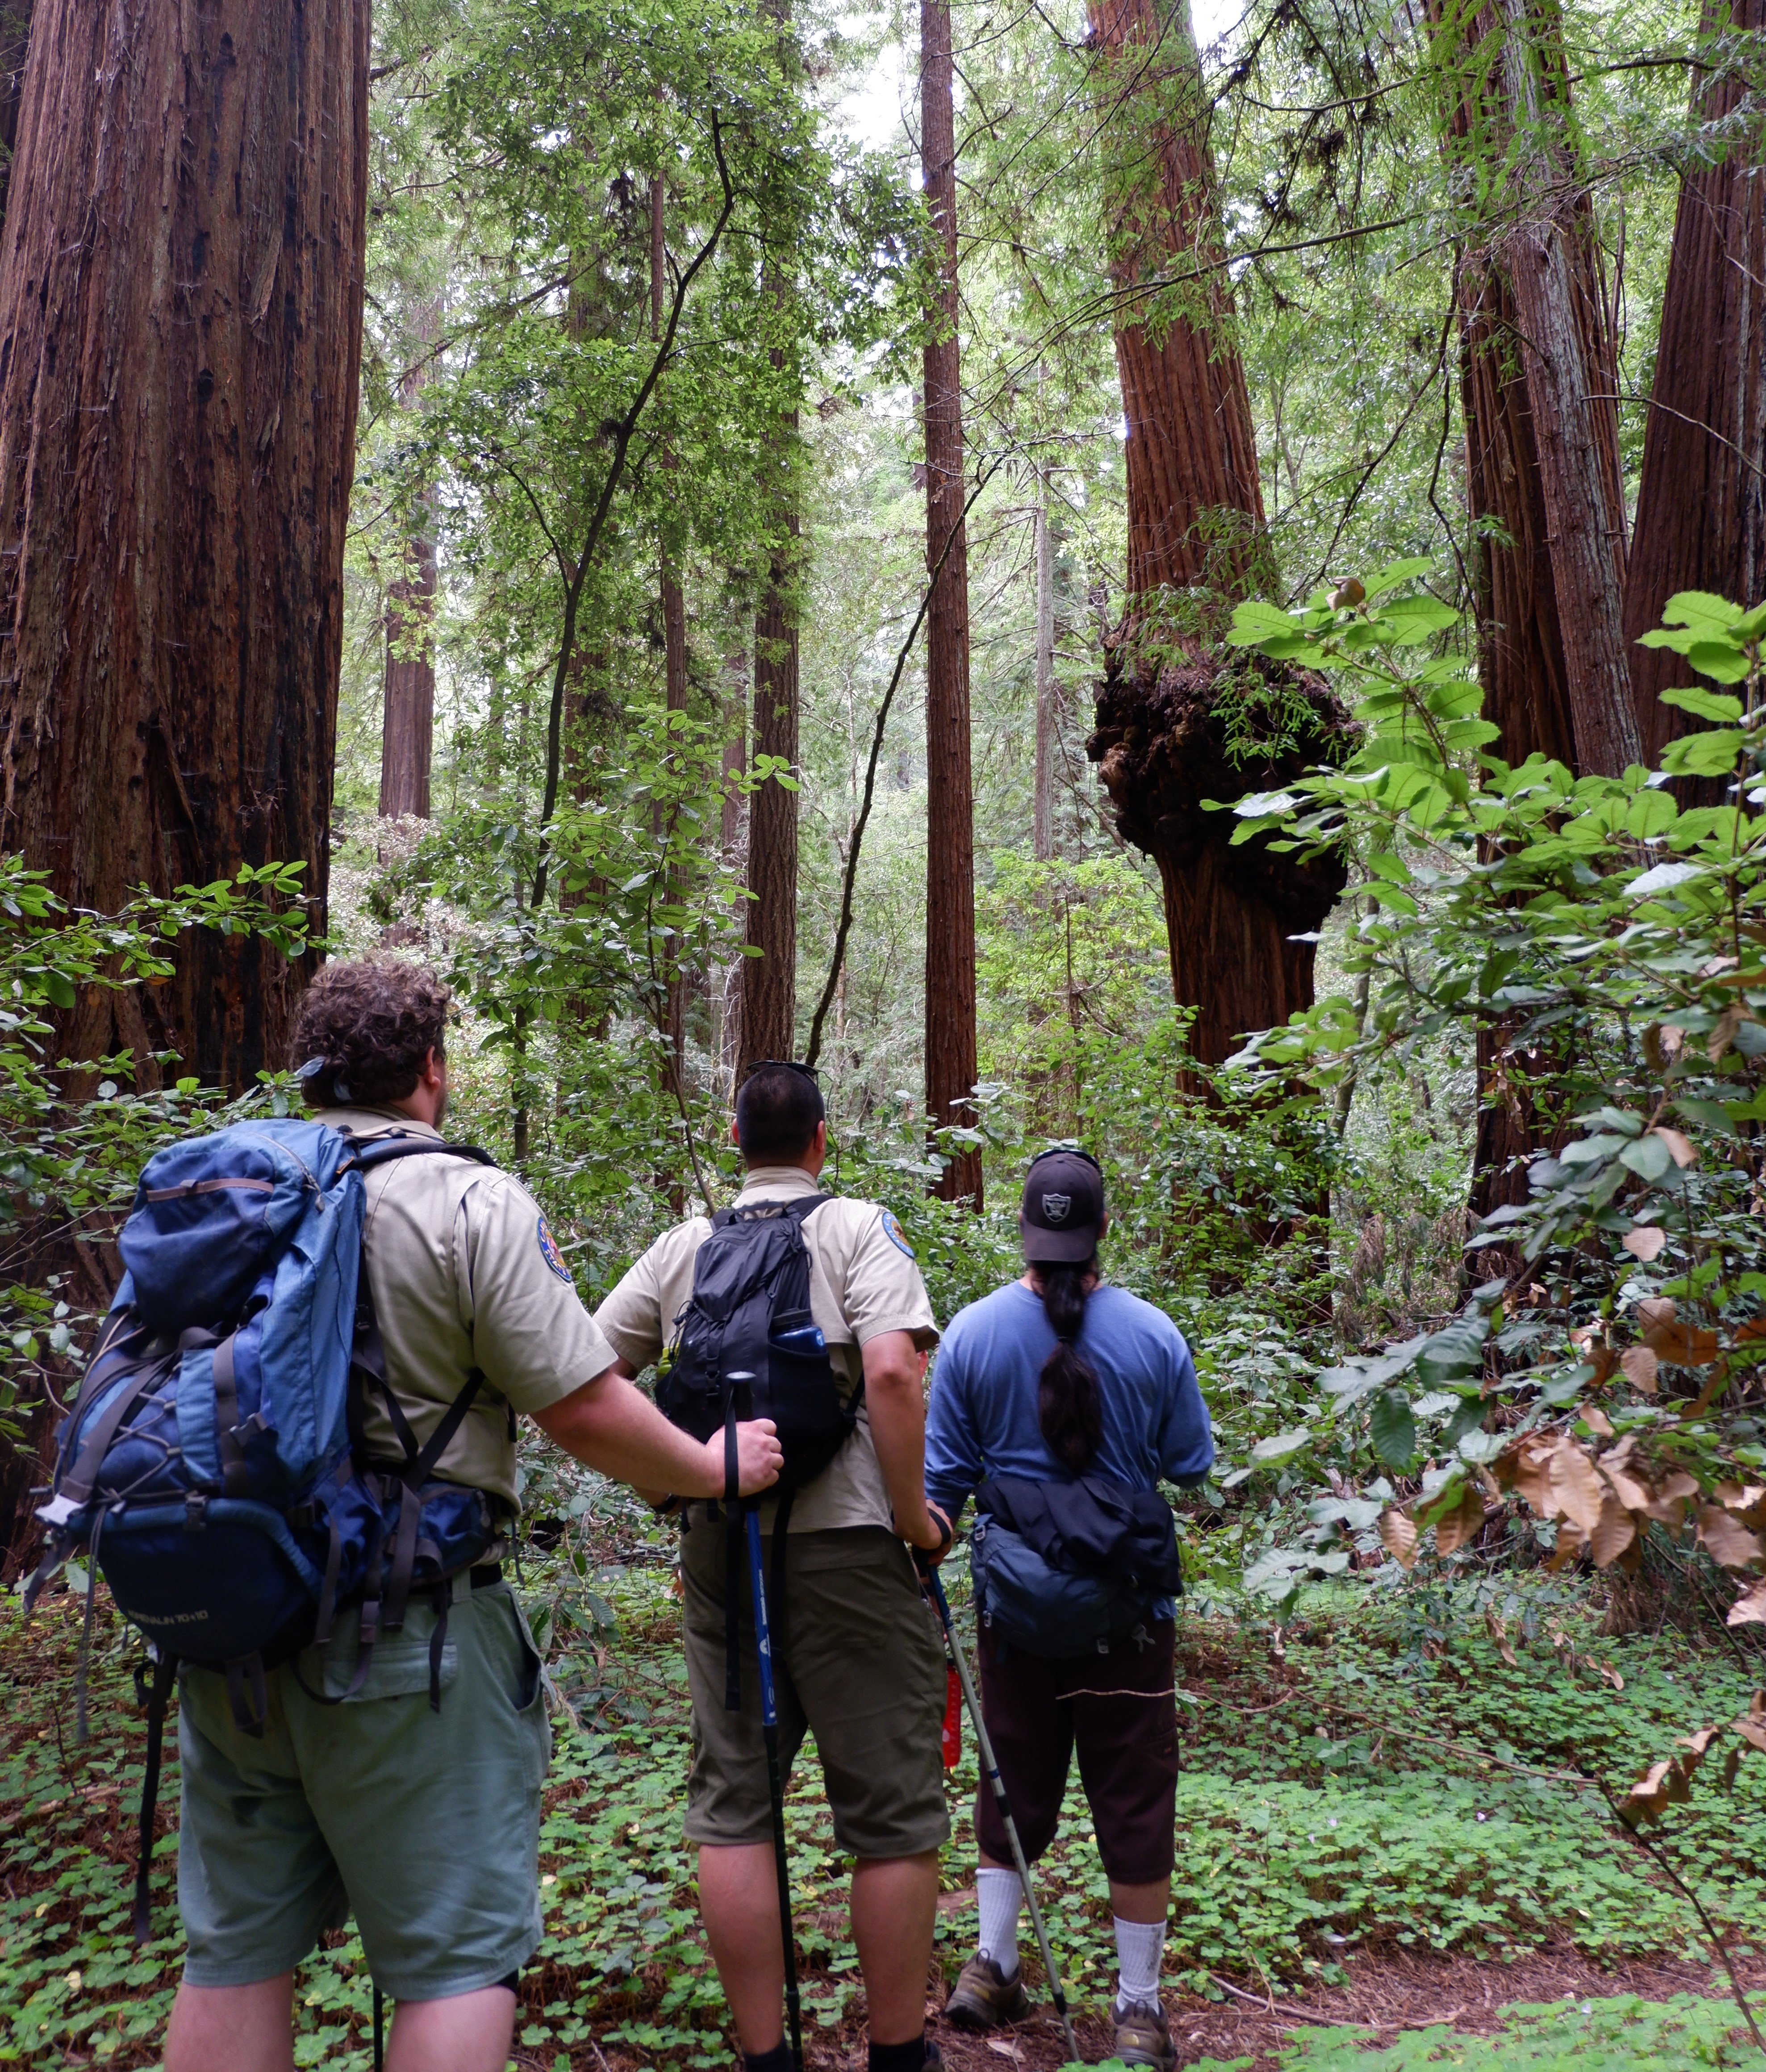 Hikers at Portola Redwoods State Park lookin up to see a high burl in a redwood trunk